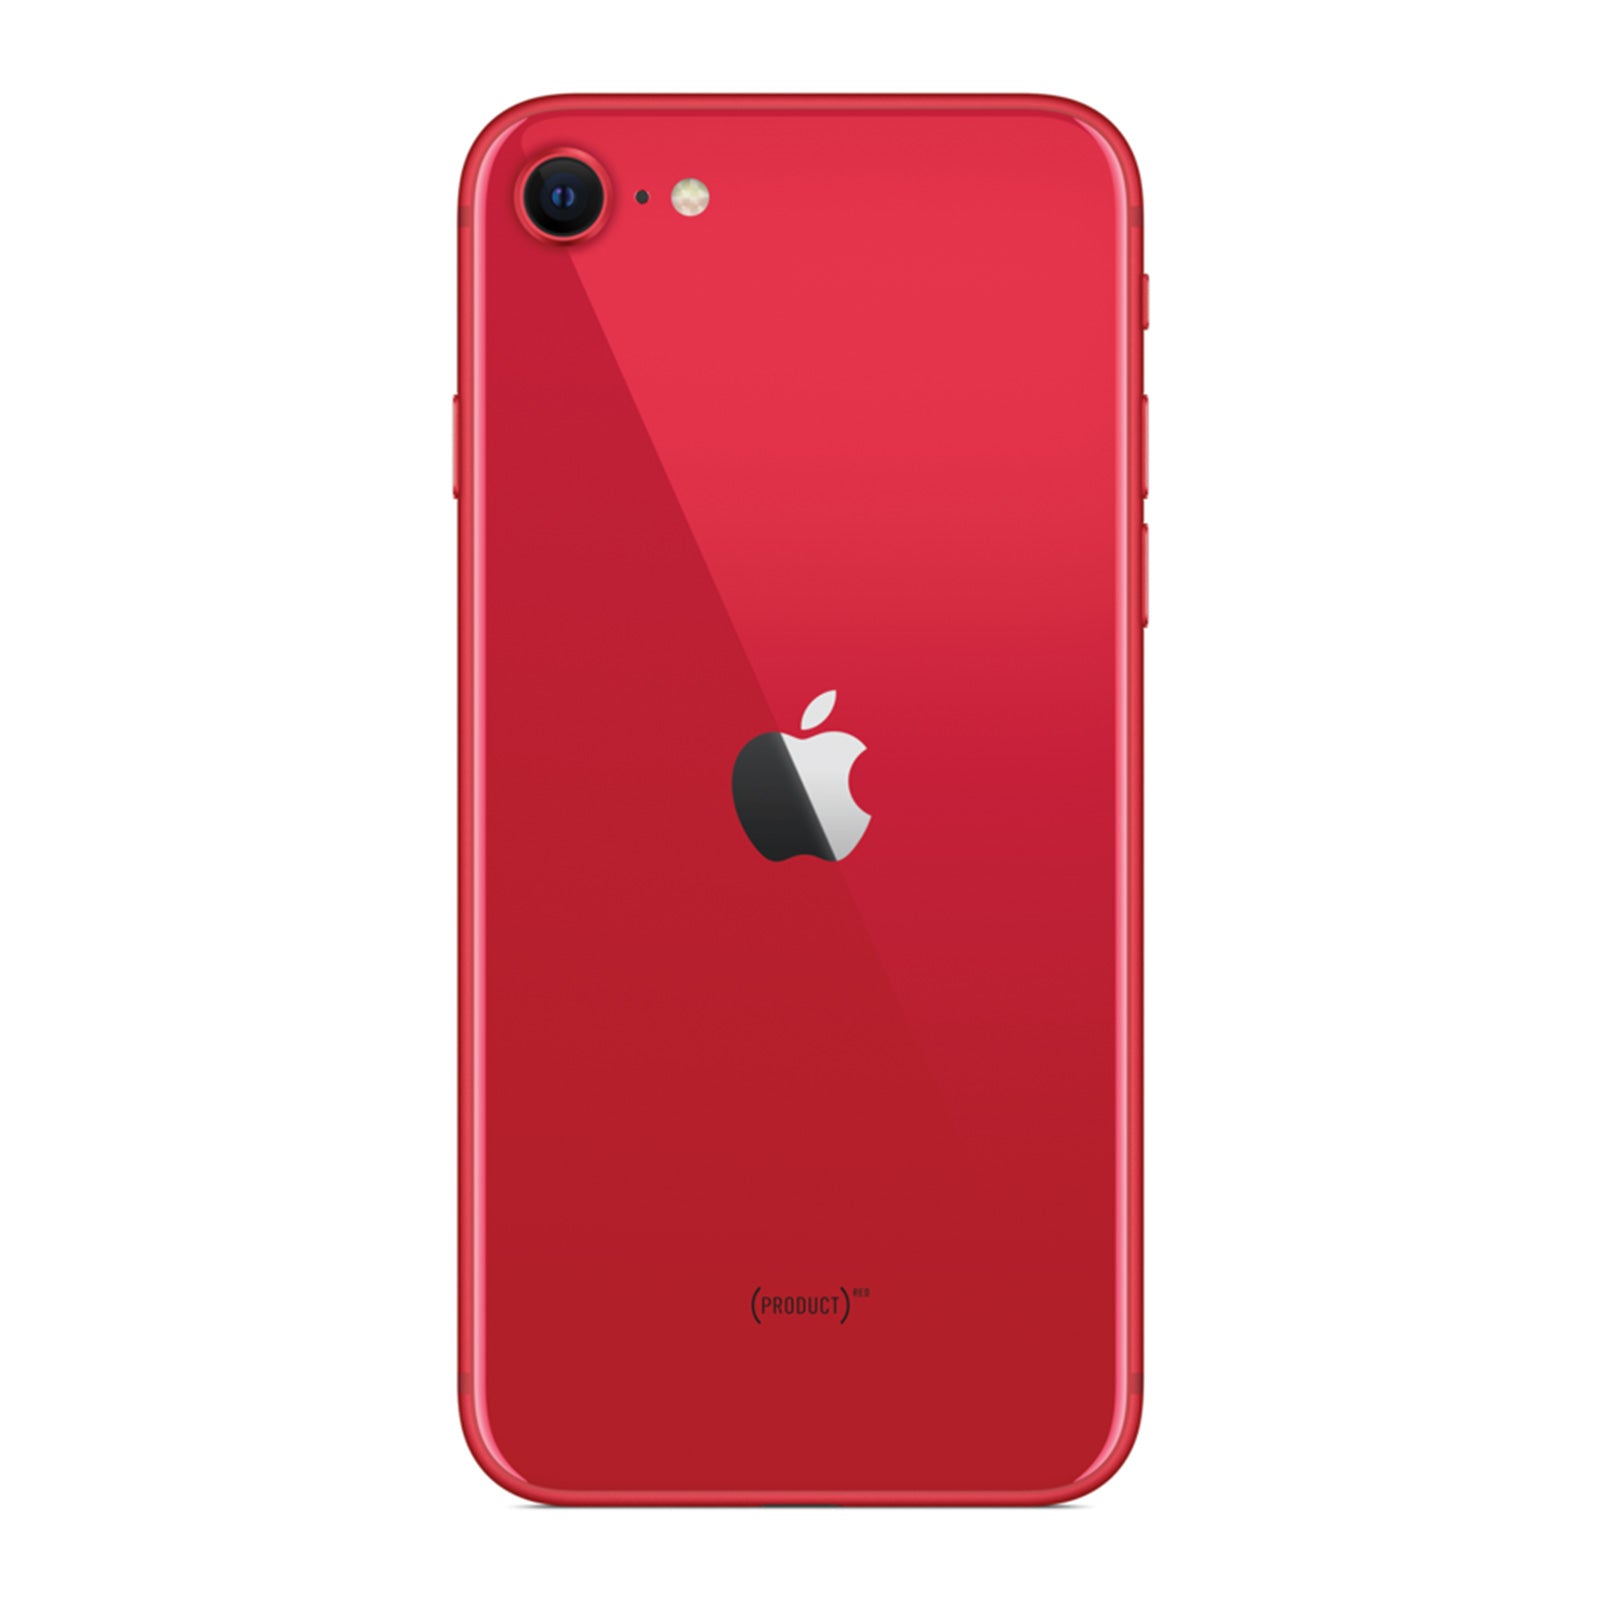 Apple iPhone SE 2nd Gen 128GB Product Red Pristine T-Mobile